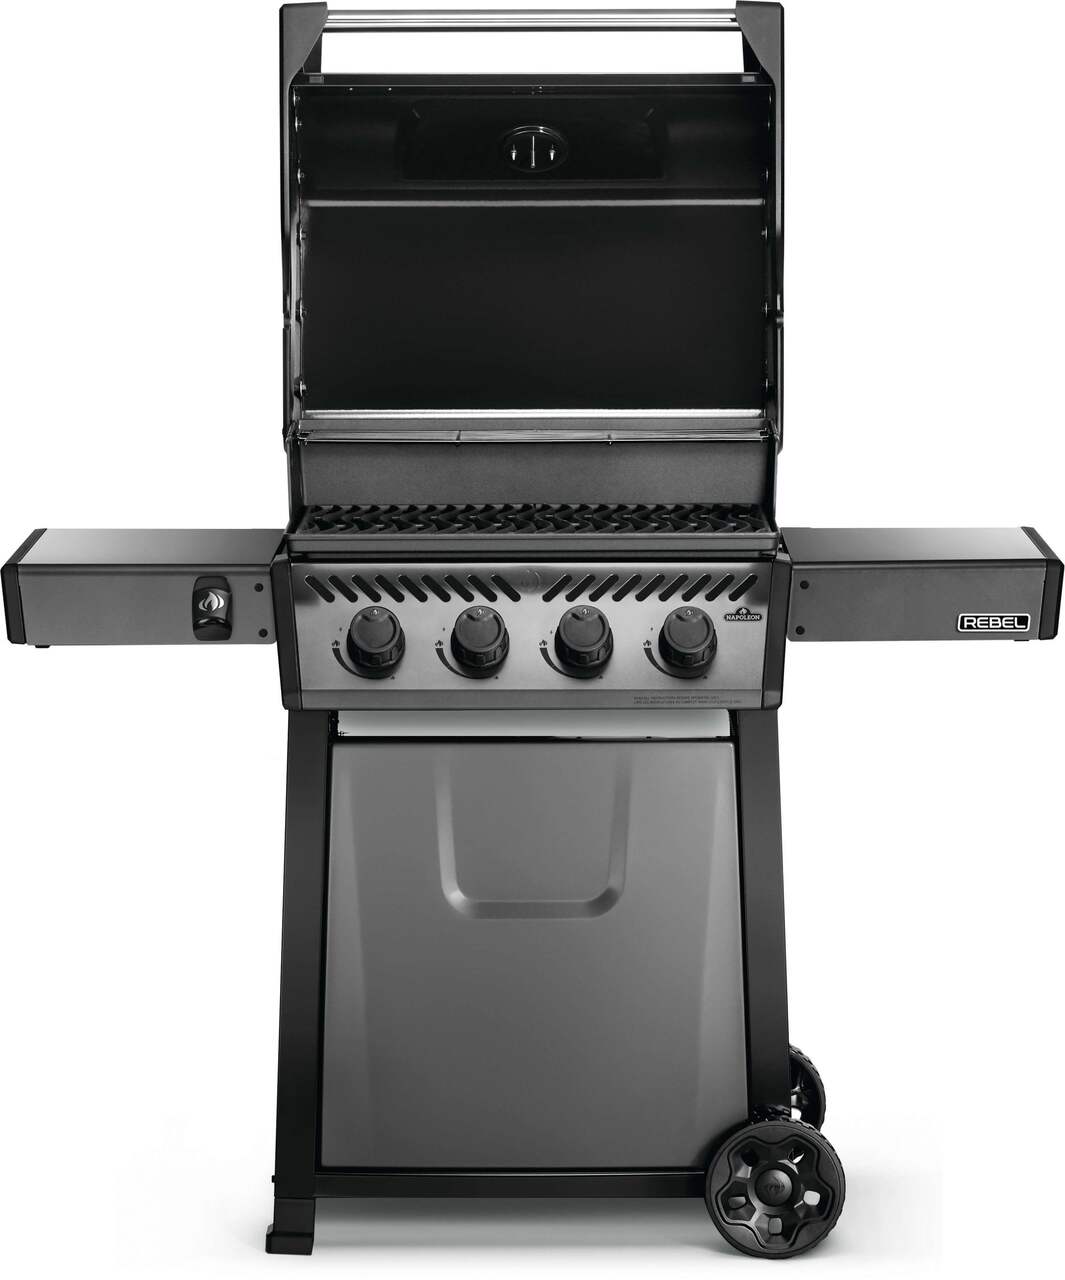 Napoleon Rebel Natural Gas BBQ Grill with 4 Burners, Graphite Grey, Folding  Side Shelves, Cast Iron Cooking Grids